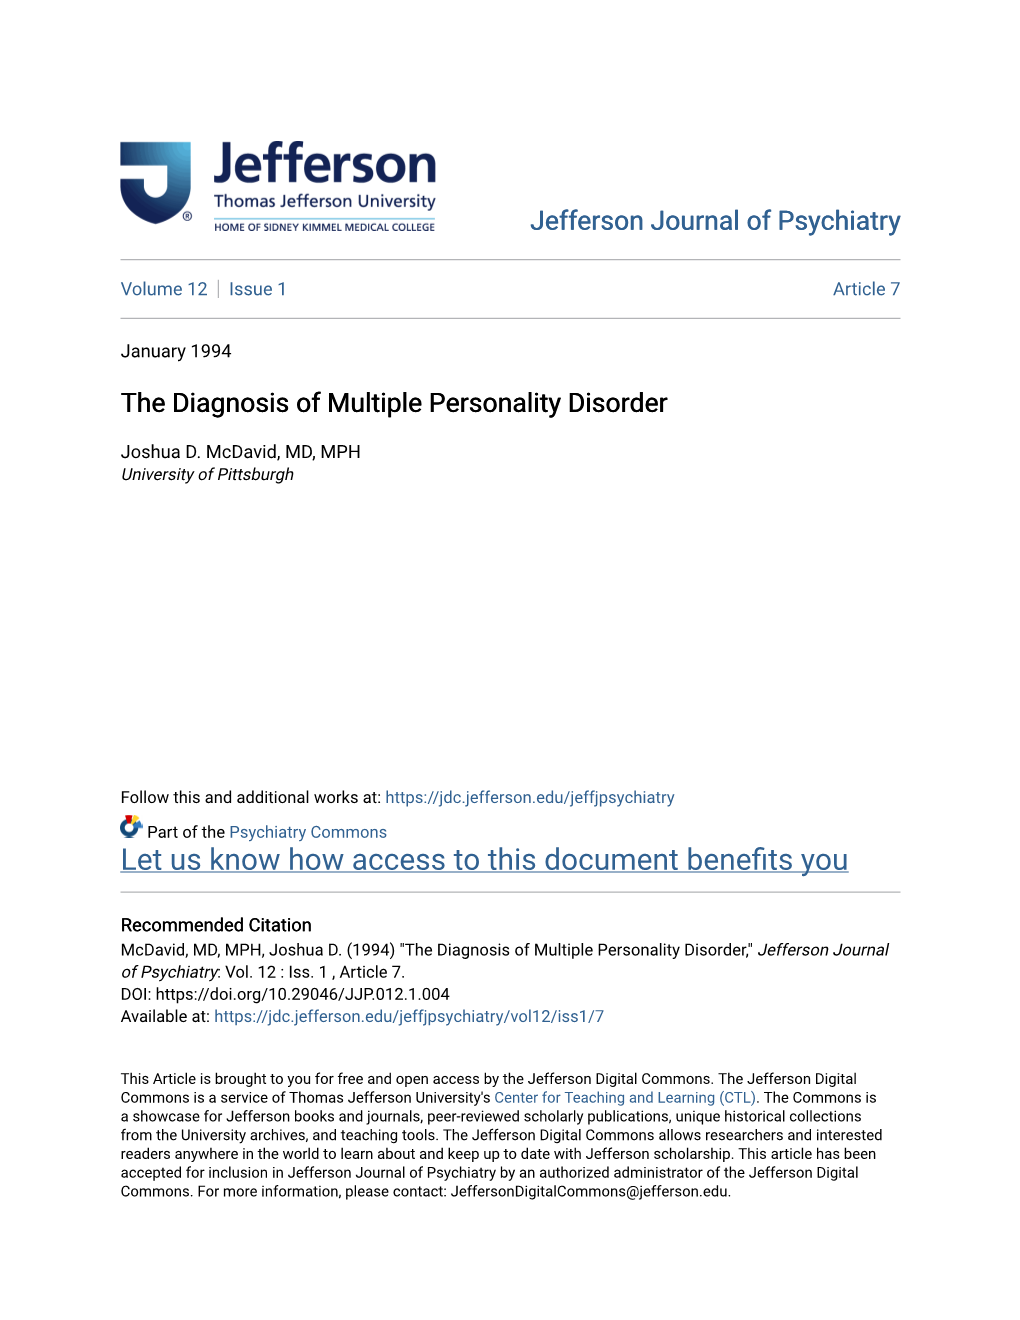 The Diagnosis of Multiple Personality Disorder